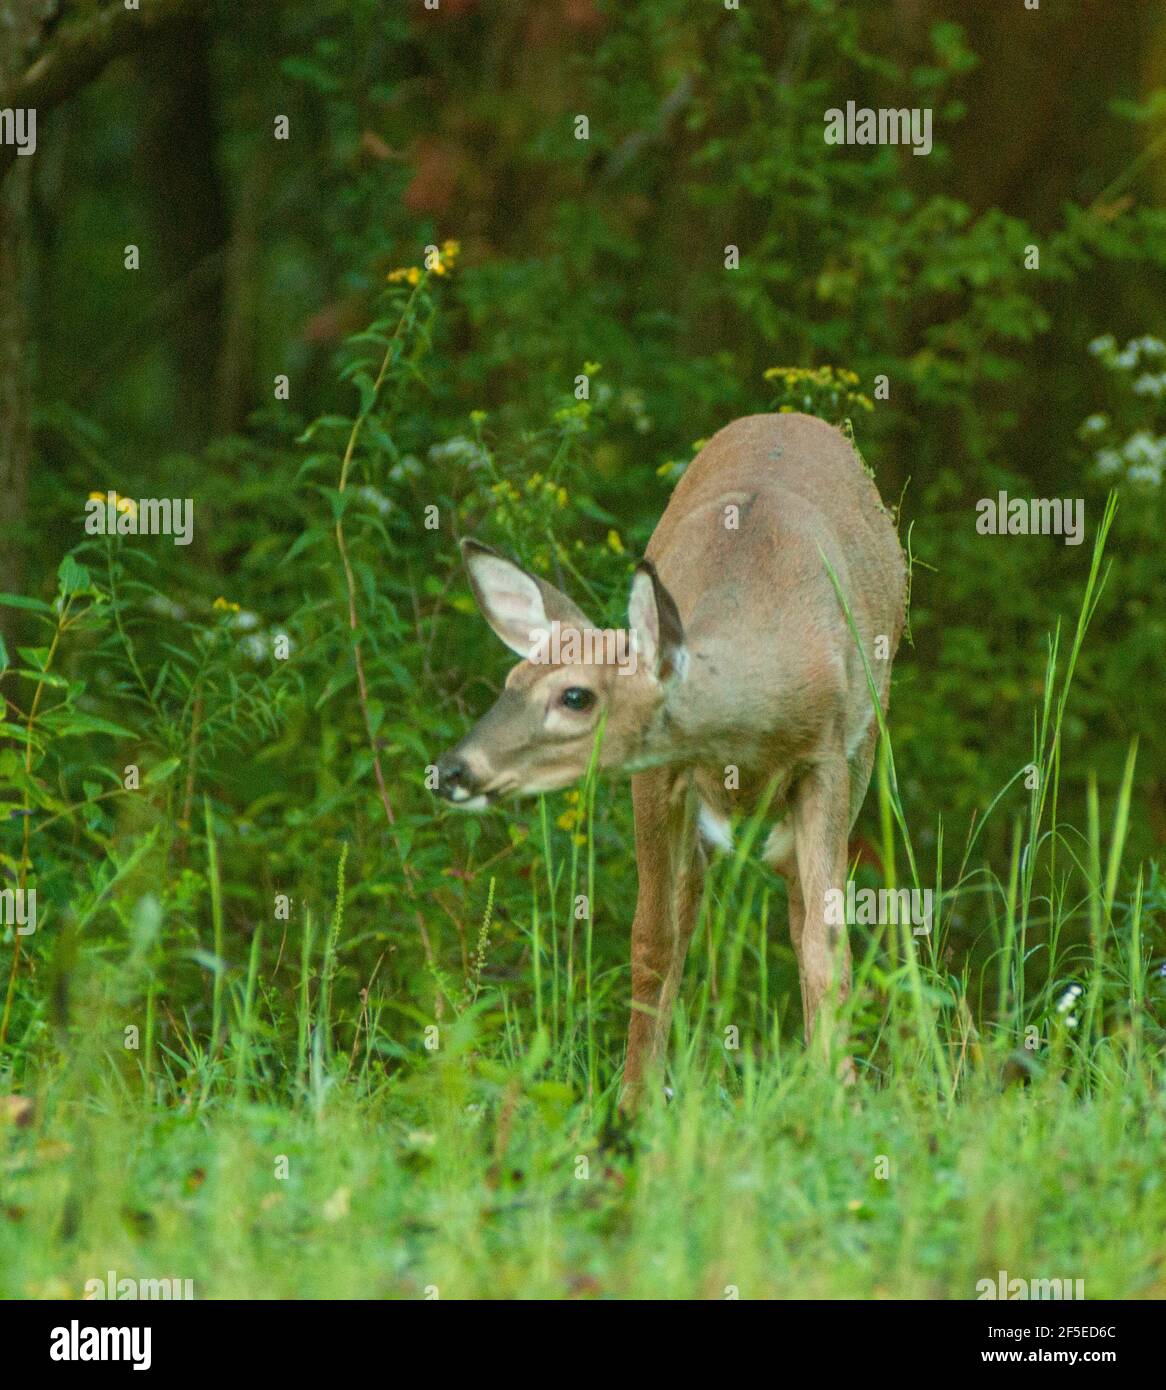 Closeup shot of a deer in hiding the forest behind the greenery Stock Photo